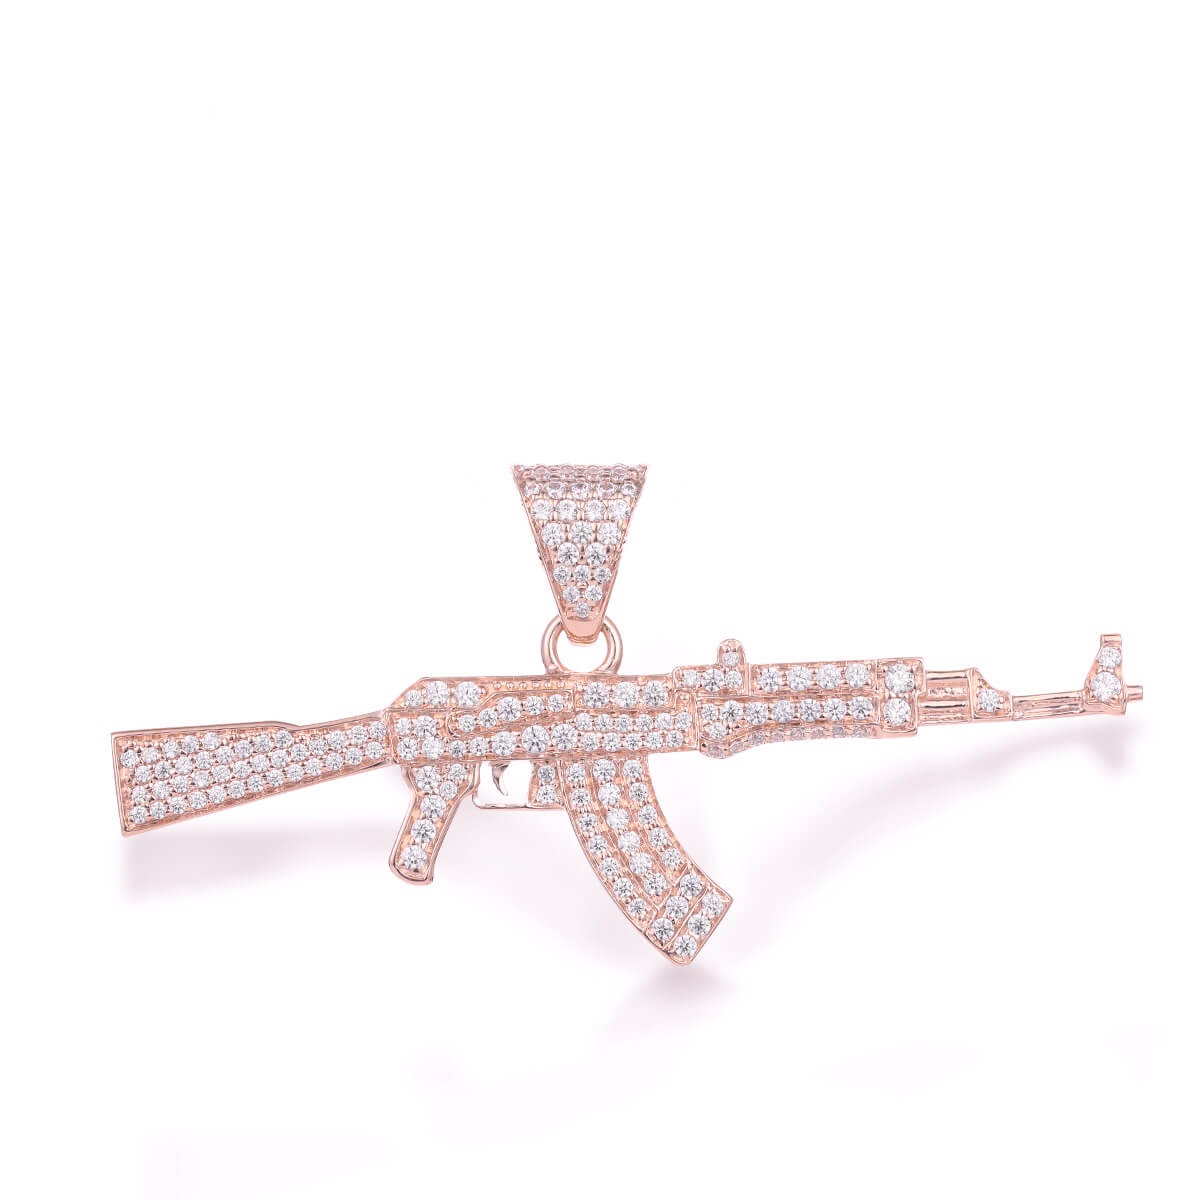 Mens Iced Out AK 47 Rifle Gun & Red Ruby Pendant Necklace Jewelry Set  Rapper Accessories From Yishop4u, $10.85 | DHgate.Com